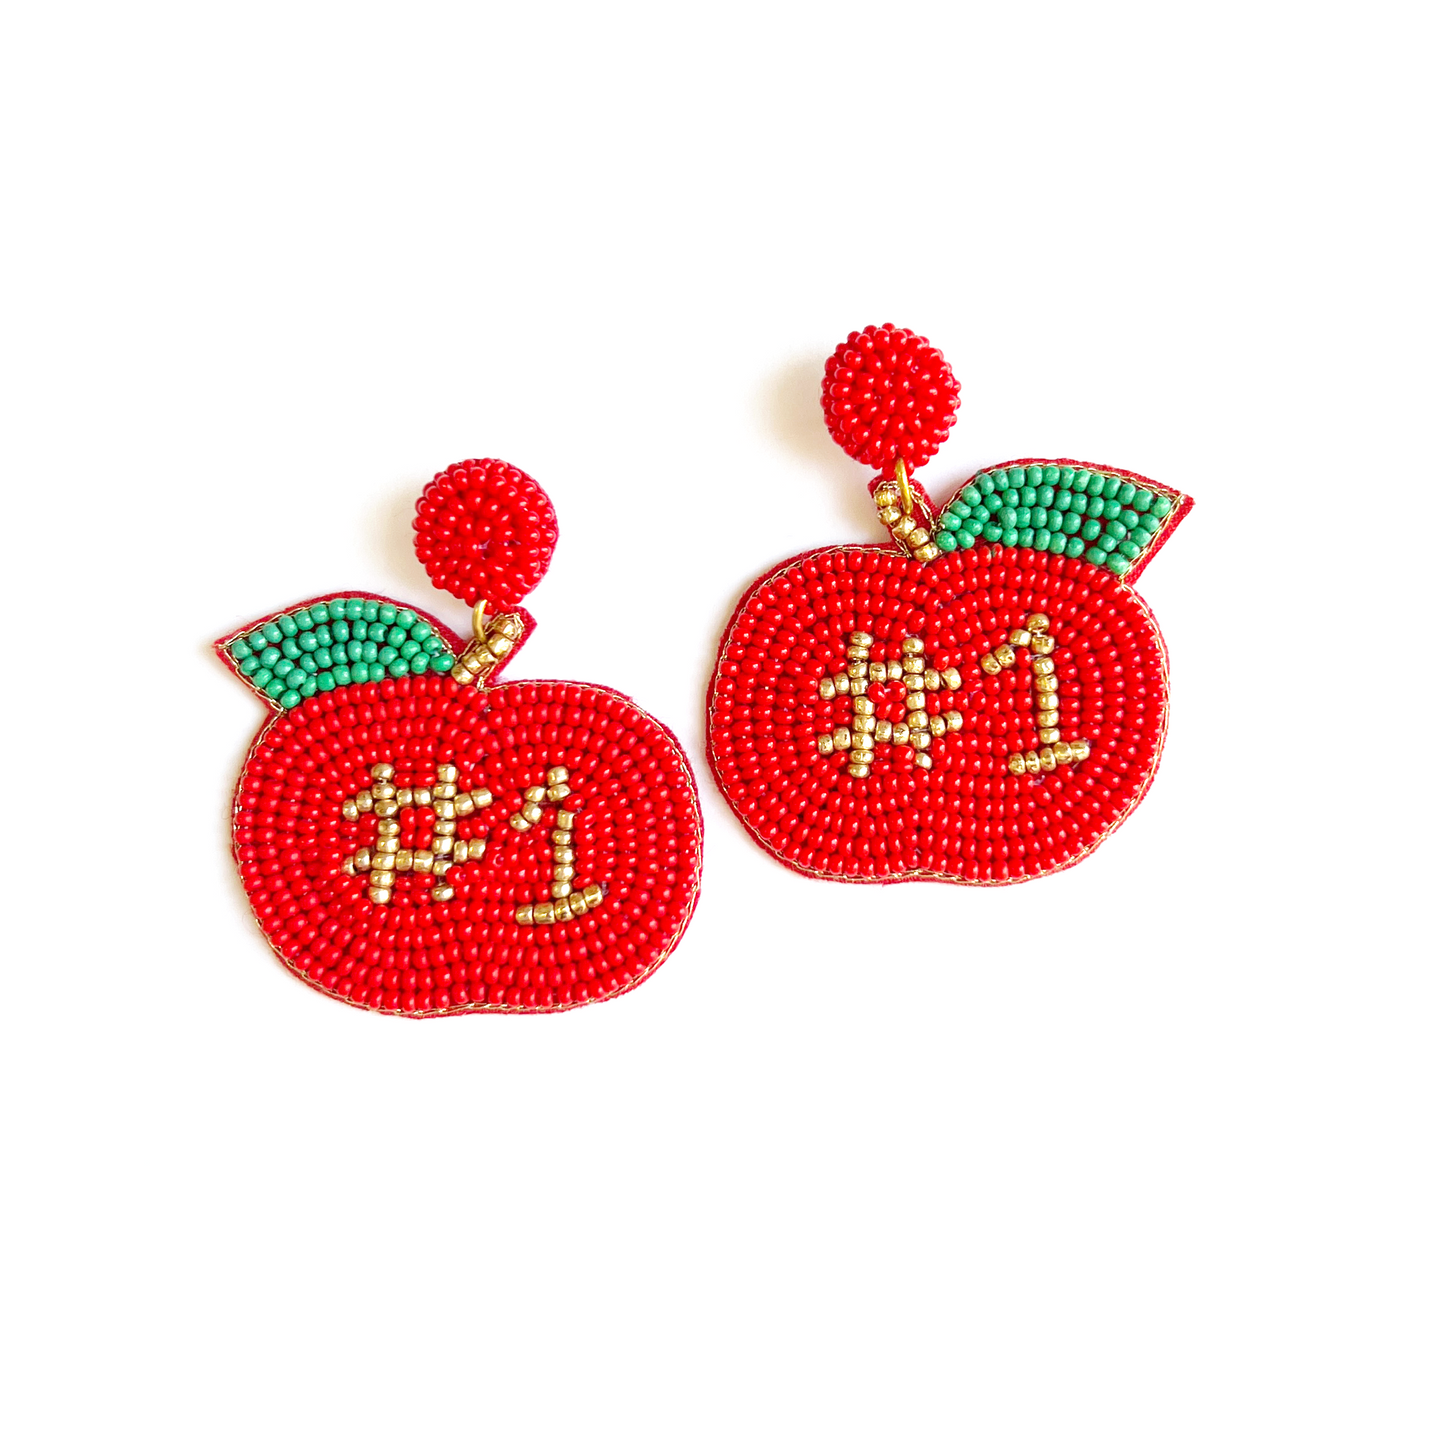 hand beaded apple earrings that say #1 to give as teacher gift